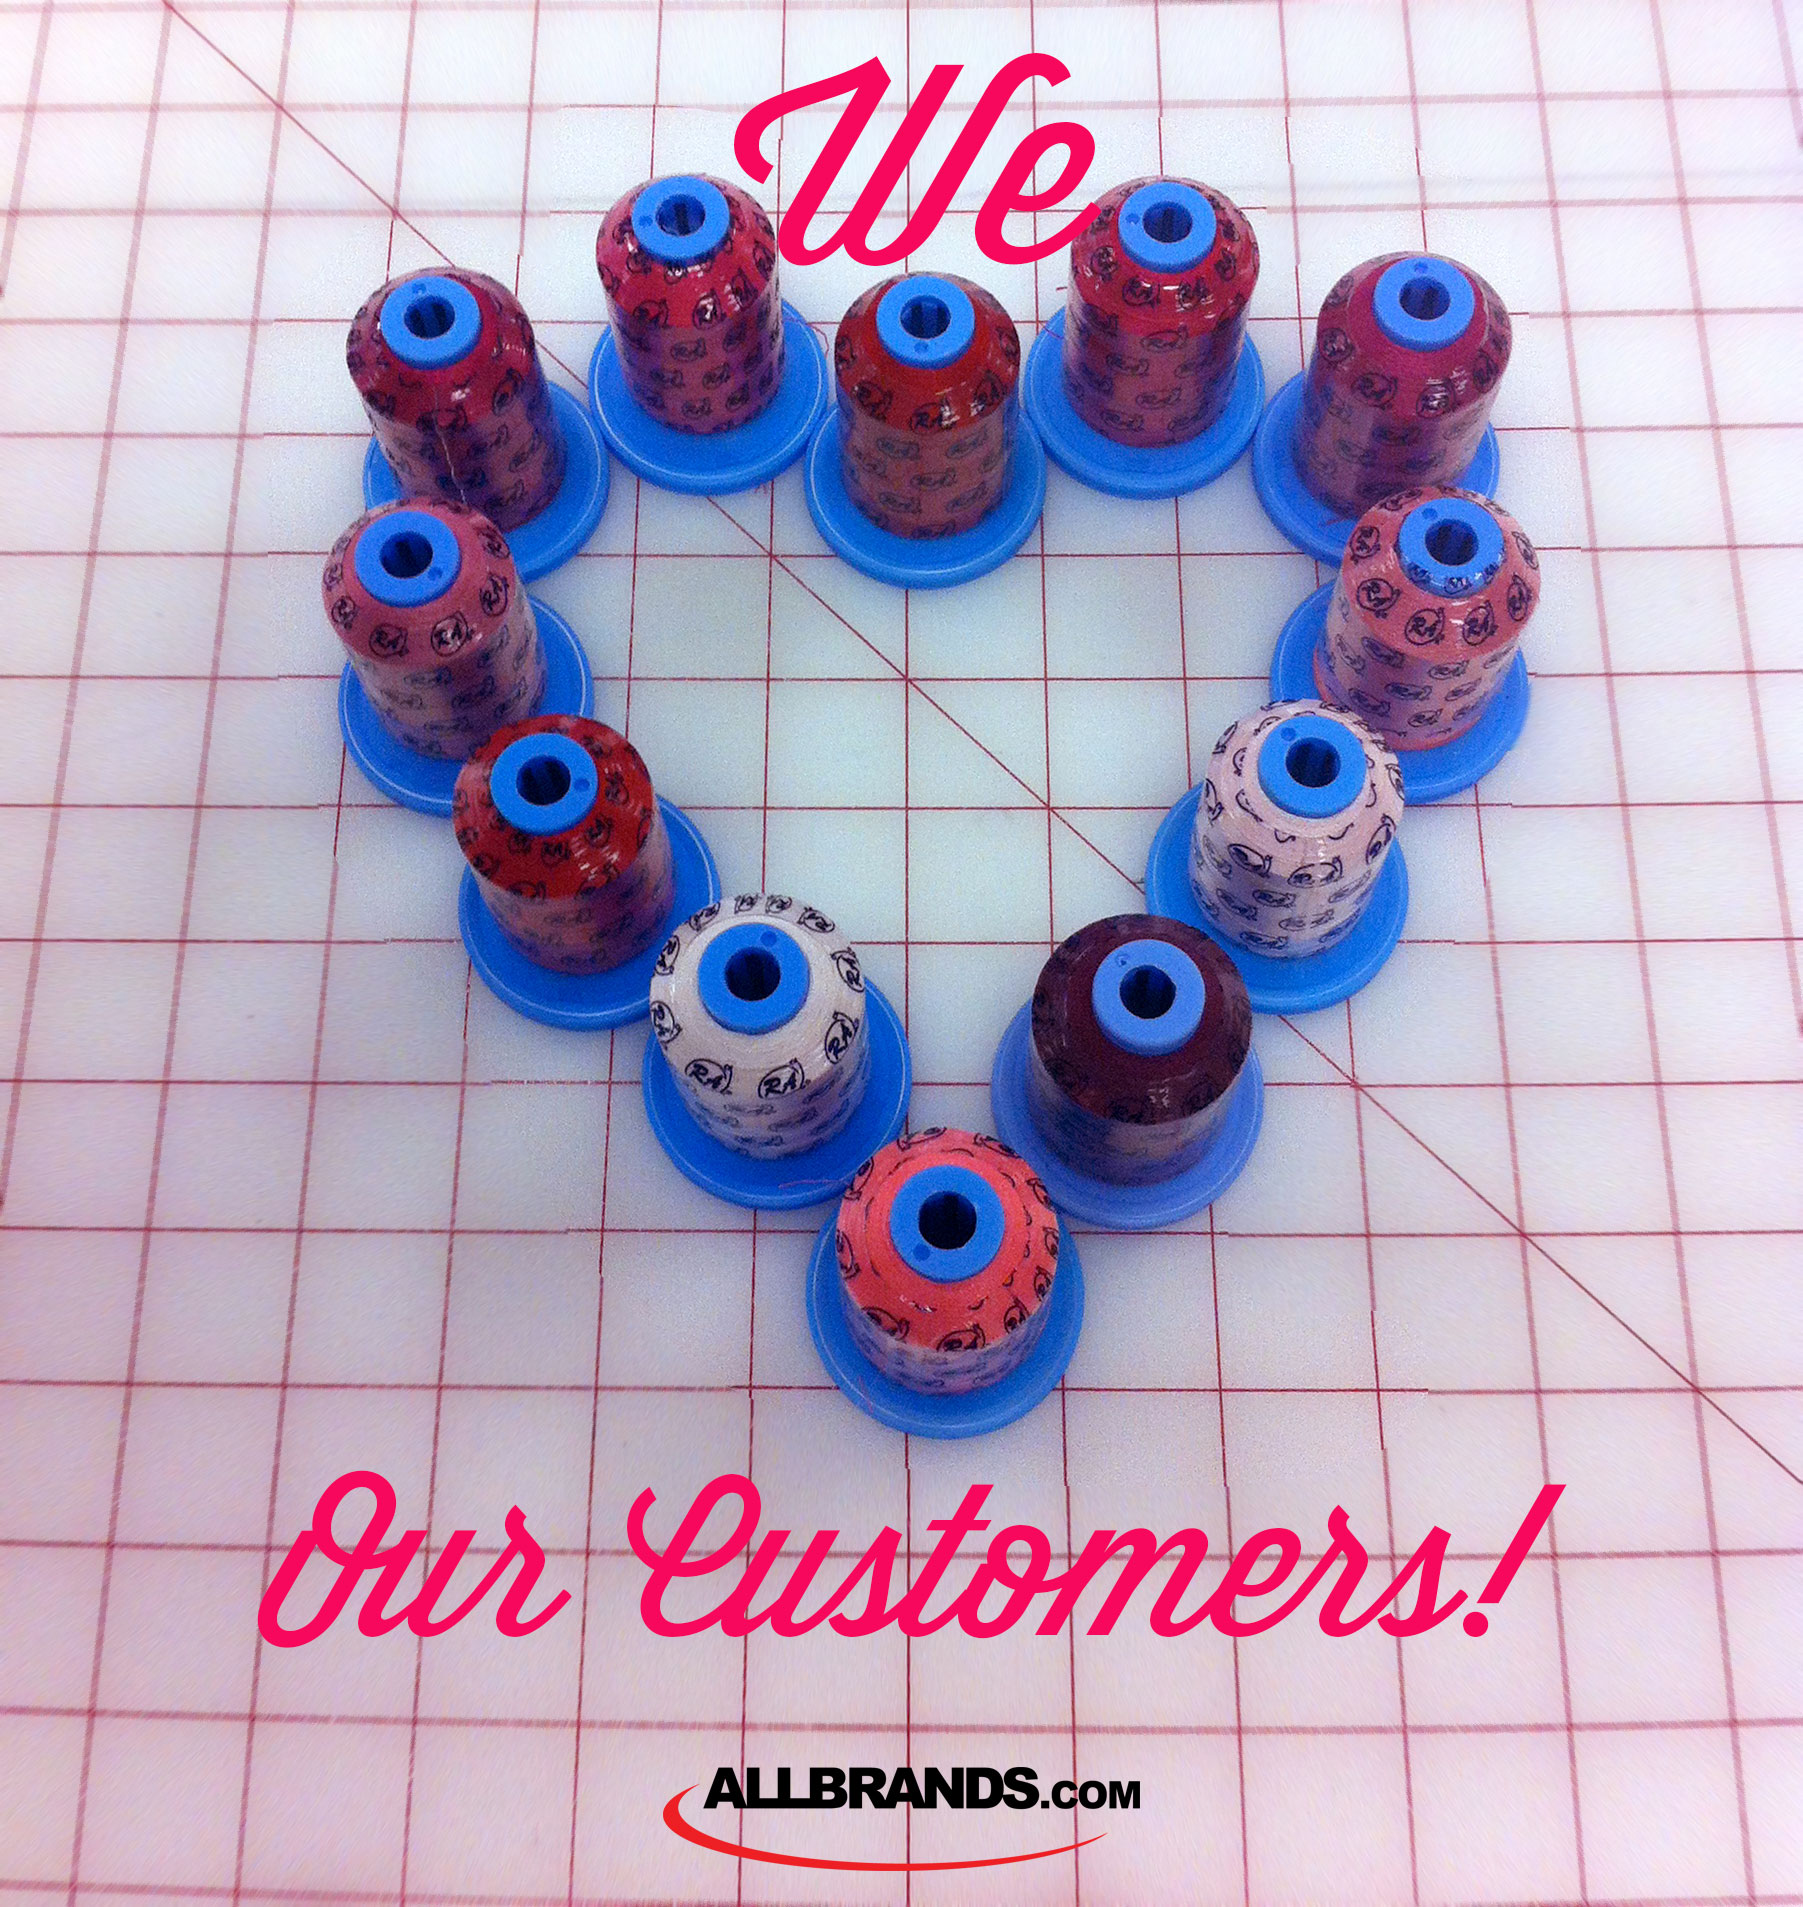 We Wanted You To Know: We Love Our Customers!